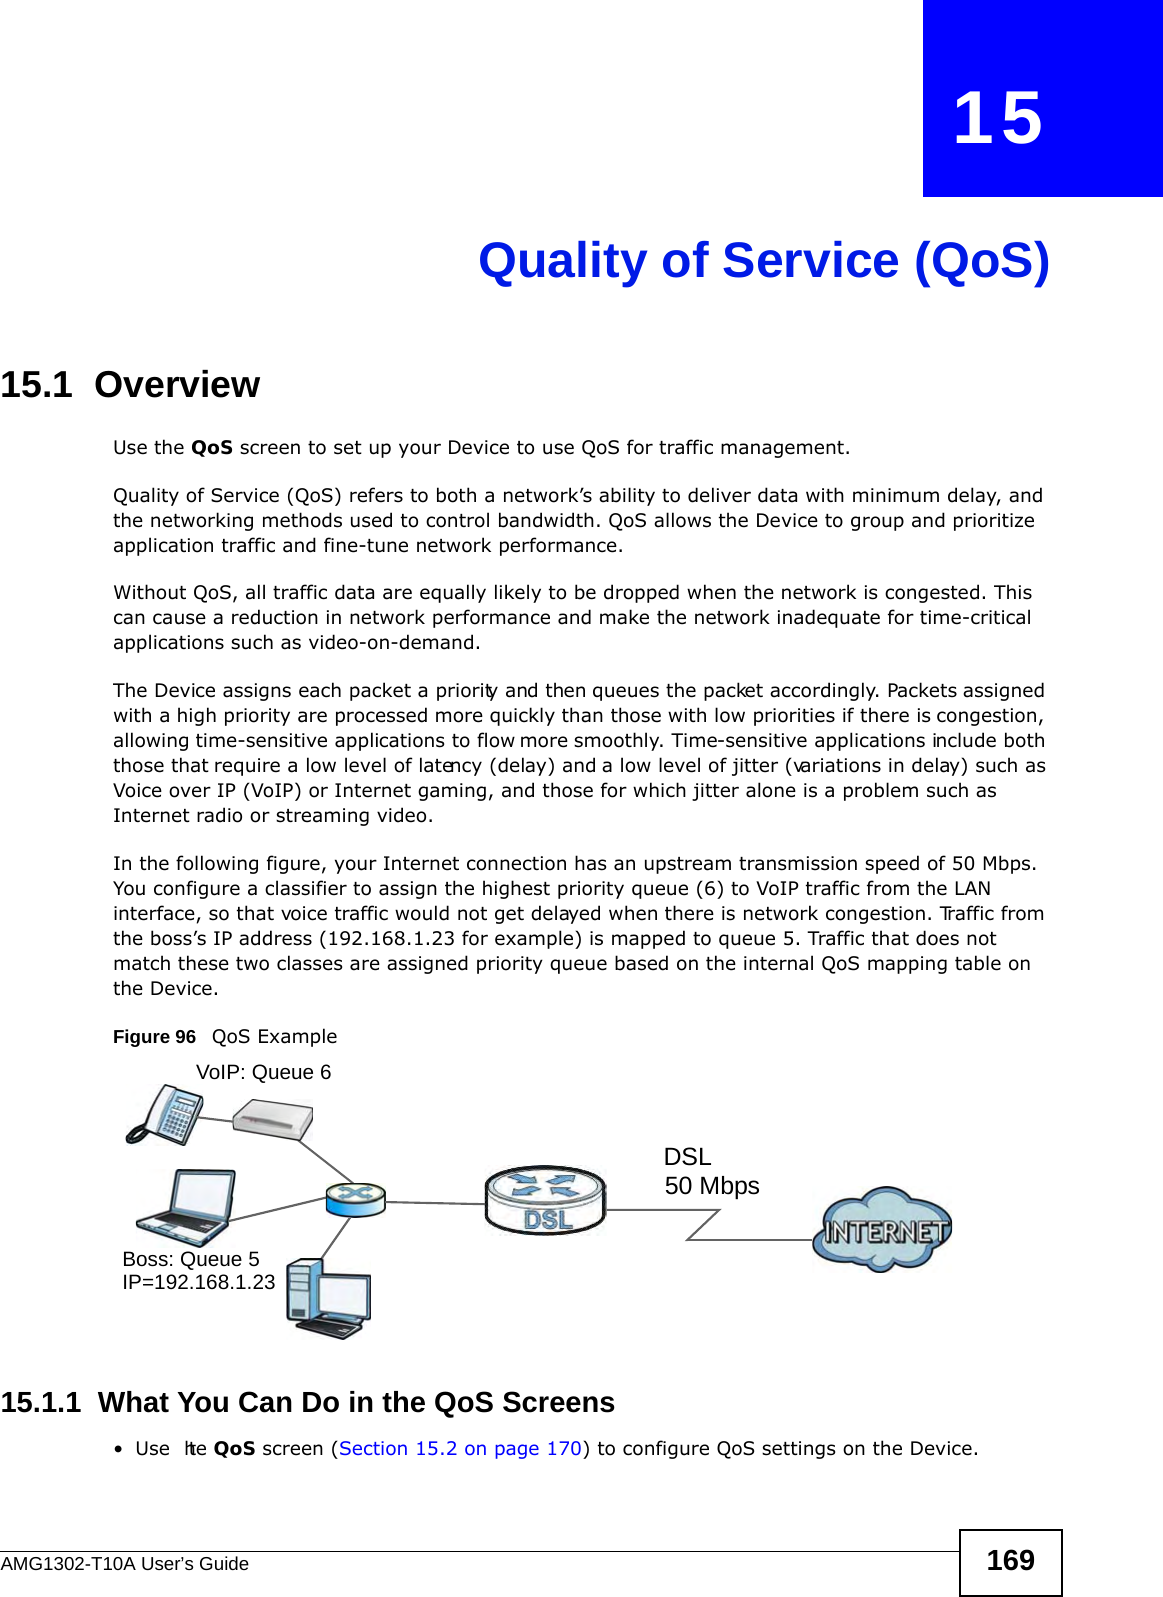 AMG1302-T10A User’s Guide 169CHAPTER   15Quality of Service (QoS)15.1  OverviewUse the QoS screen to set up your Device to use QoS for traffic management. Quality of Service (QoS) refers to both a network’s ability to deliver data with minimum delay, and the networking methods used to control bandwidth. QoS allows the Device to group and prioritize application traffic and fine-tune network performance. Without QoS, all traffic data are equally likely to be dropped when the network is congested. This can cause a reduction in network performance and make the network inadequate for time-critical applications such as video-on-demand.The Device assigns each packet a priority and then queues the packet accordingly. Packets assigned with a high priority are processed more quickly than those with low priorities if there is congestion, allowing time-sensitive applications to flow more smoothly. Time-sensitive applications include both those that require a low level of latency (delay) and a low level of jitter (variations in delay) such as Voice over IP (VoIP) or Internet gaming, and those for which jitter alone is a problem such as Internet radio or streaming video.In the following figure, your Internet connection has an upstream transmission speed of 50 Mbps. You configure a classifier to assign the highest priority queue (6) to VoIP traffic from the LAN interface, so that voice traffic would not get delayed when there is network congestion. Traffic from the boss’s IP address (192.168.1.23 for example) is mapped to queue 5. Traffic that does not match these two classes are assigned priority queue based on the internal QoS mapping table on the Device.Figure 96   QoS Example15.1.1  What You Can Do in the QoS Screens•Use  the QoS screen (Section 15.2 on page 170) to configure QoS settings on the Device.50 MbpsDSLVoIP: Queue 6Boss: Queue 5IP=192.168.1.23